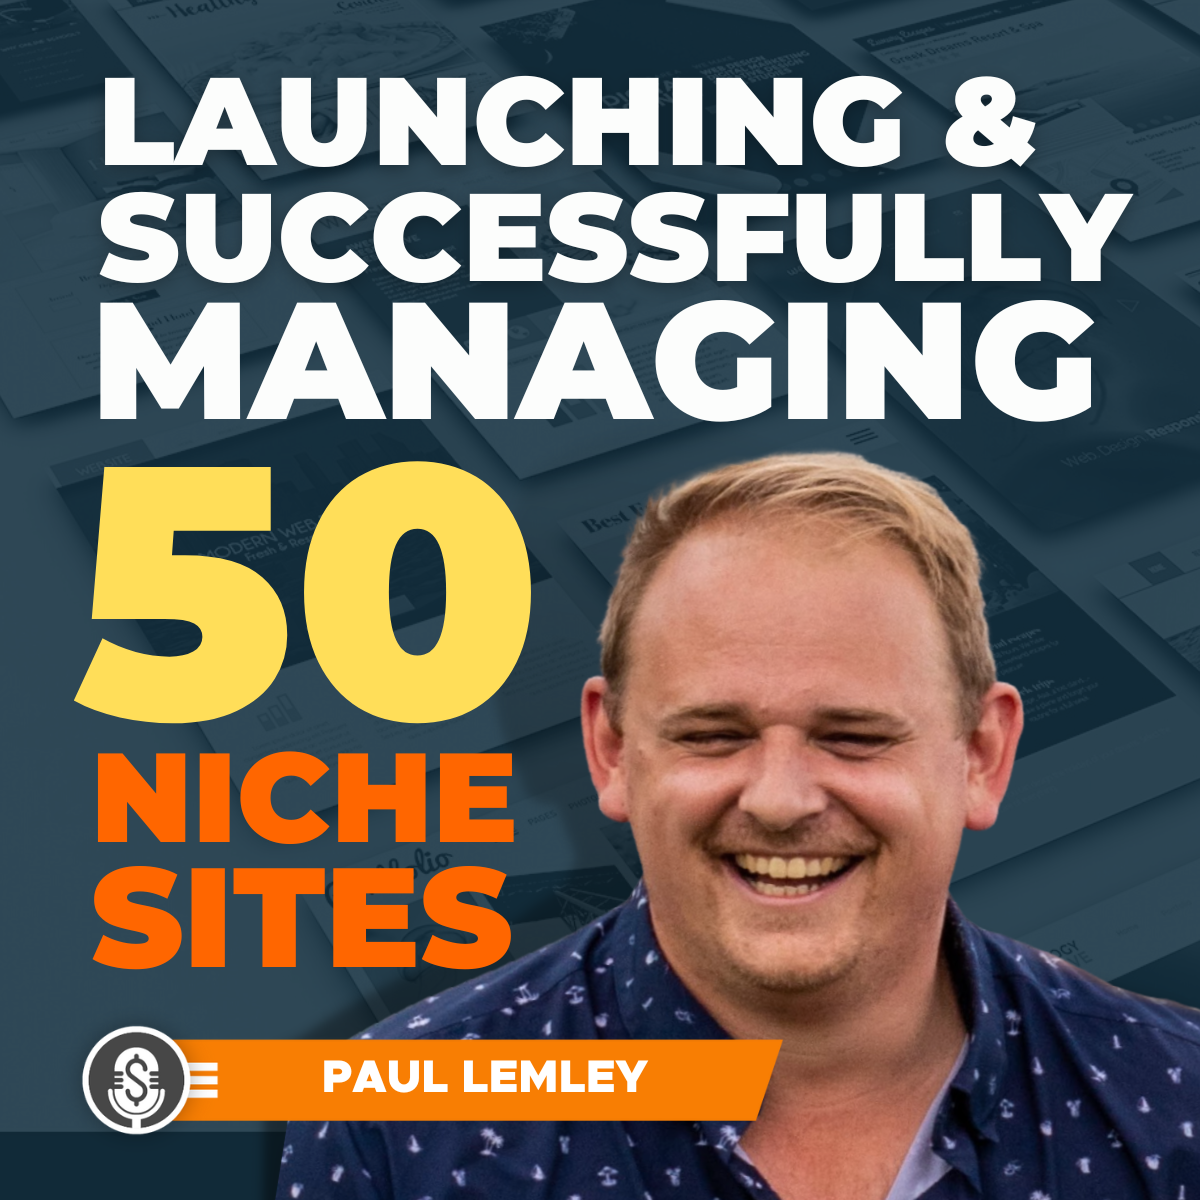 Paul Lemley on launching and successfully managing 50 niche sites